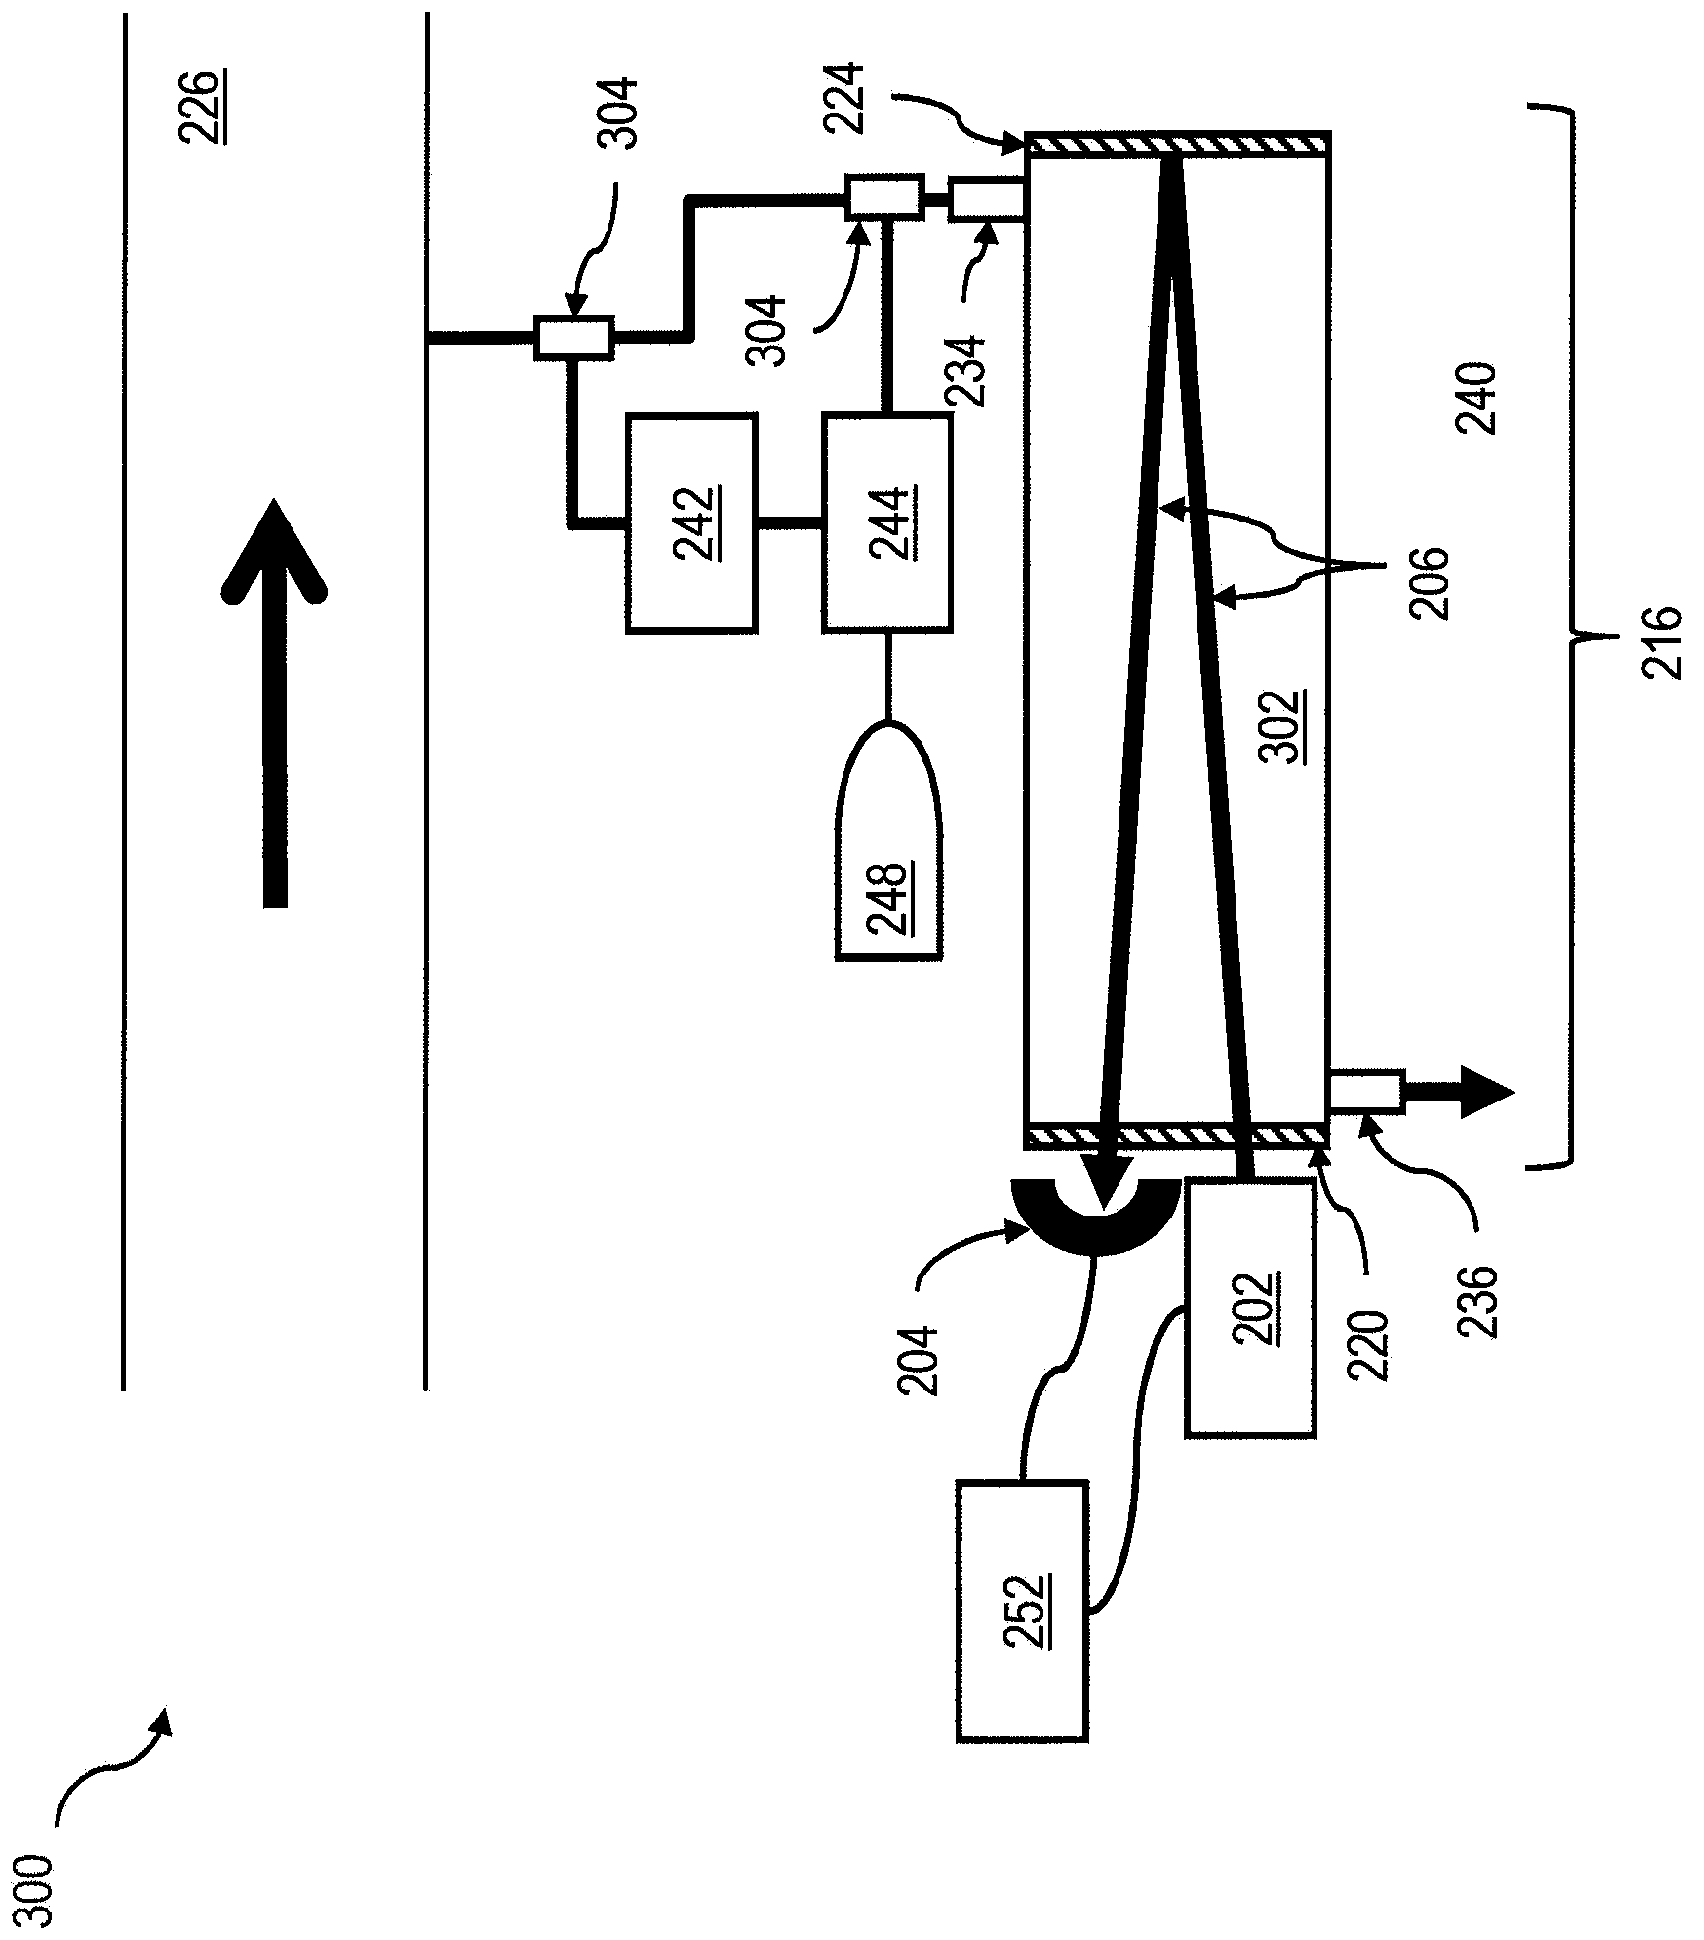 Collisional broadening compensation using real or near-real time validation in spectroscopic analyzers